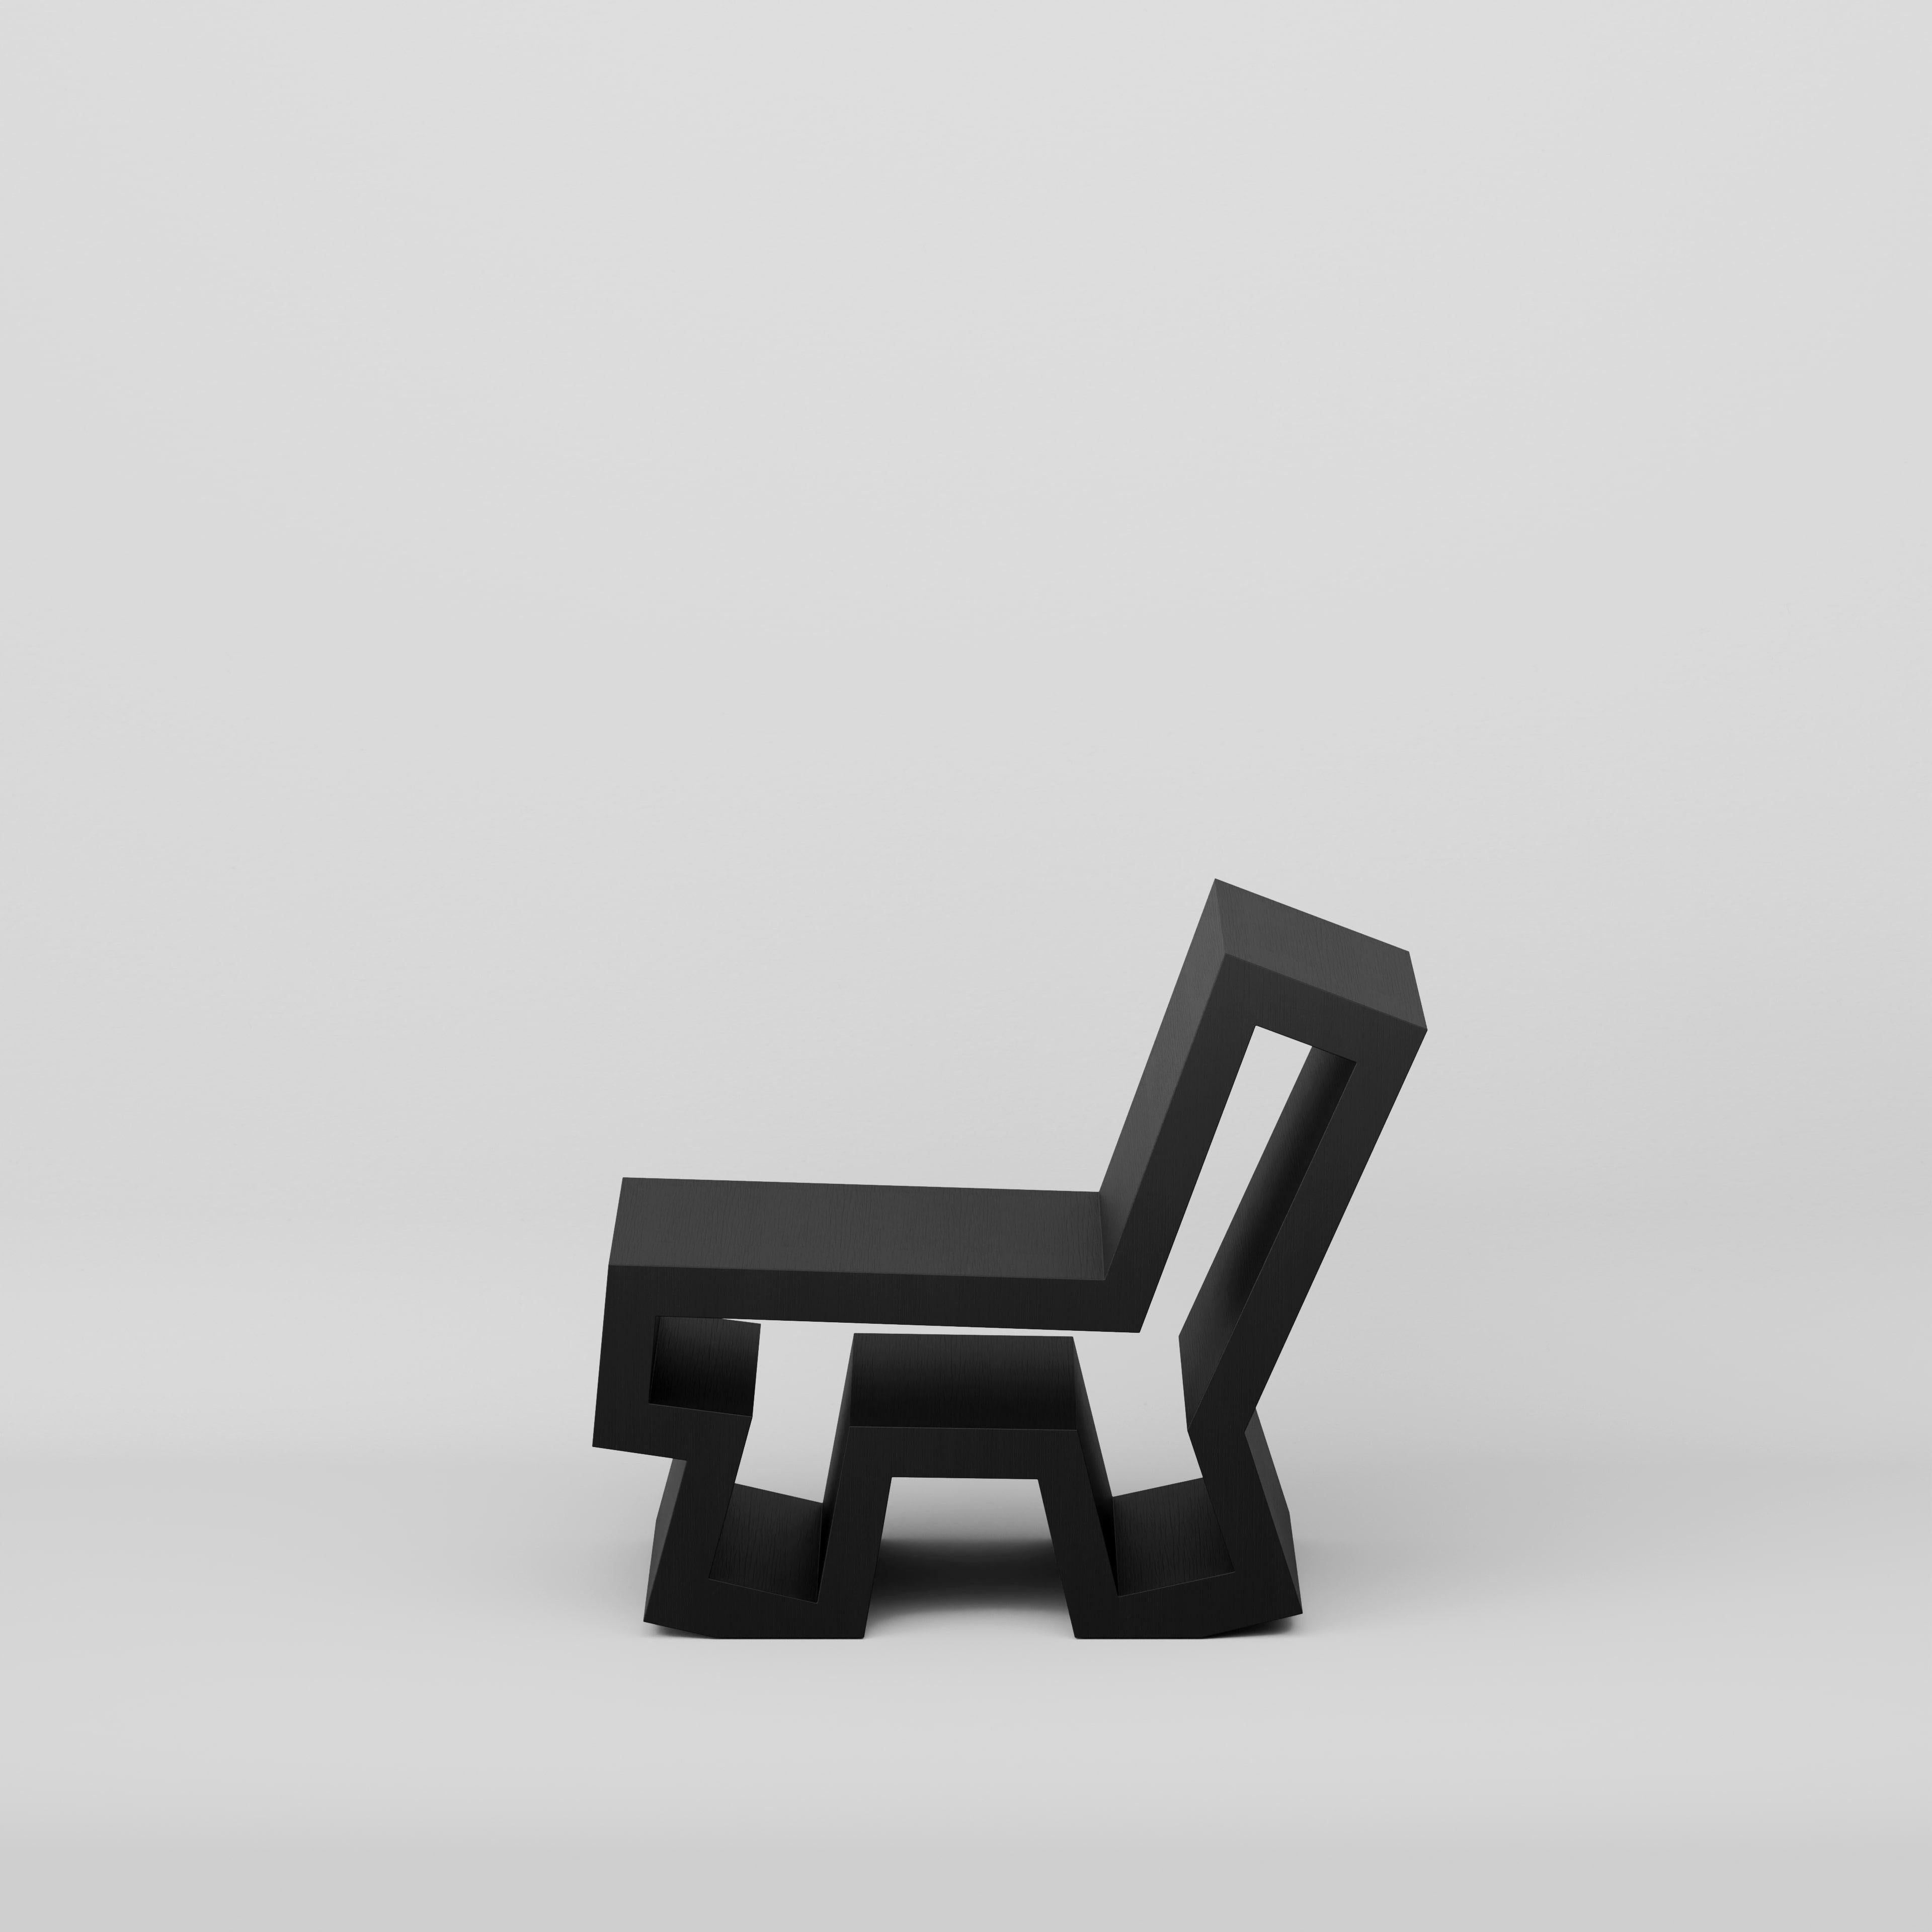 Graffiti Project Lounge Chair by Wonwoo Koo
Dimensions: D 87.3 x W 50 x H 72.7 cm.
Materials: Oak wood veneer.

Different color options are available: black, beige, white gray, blue or orange. Please contact us.

Wonwoo Koo
I majored in furniture